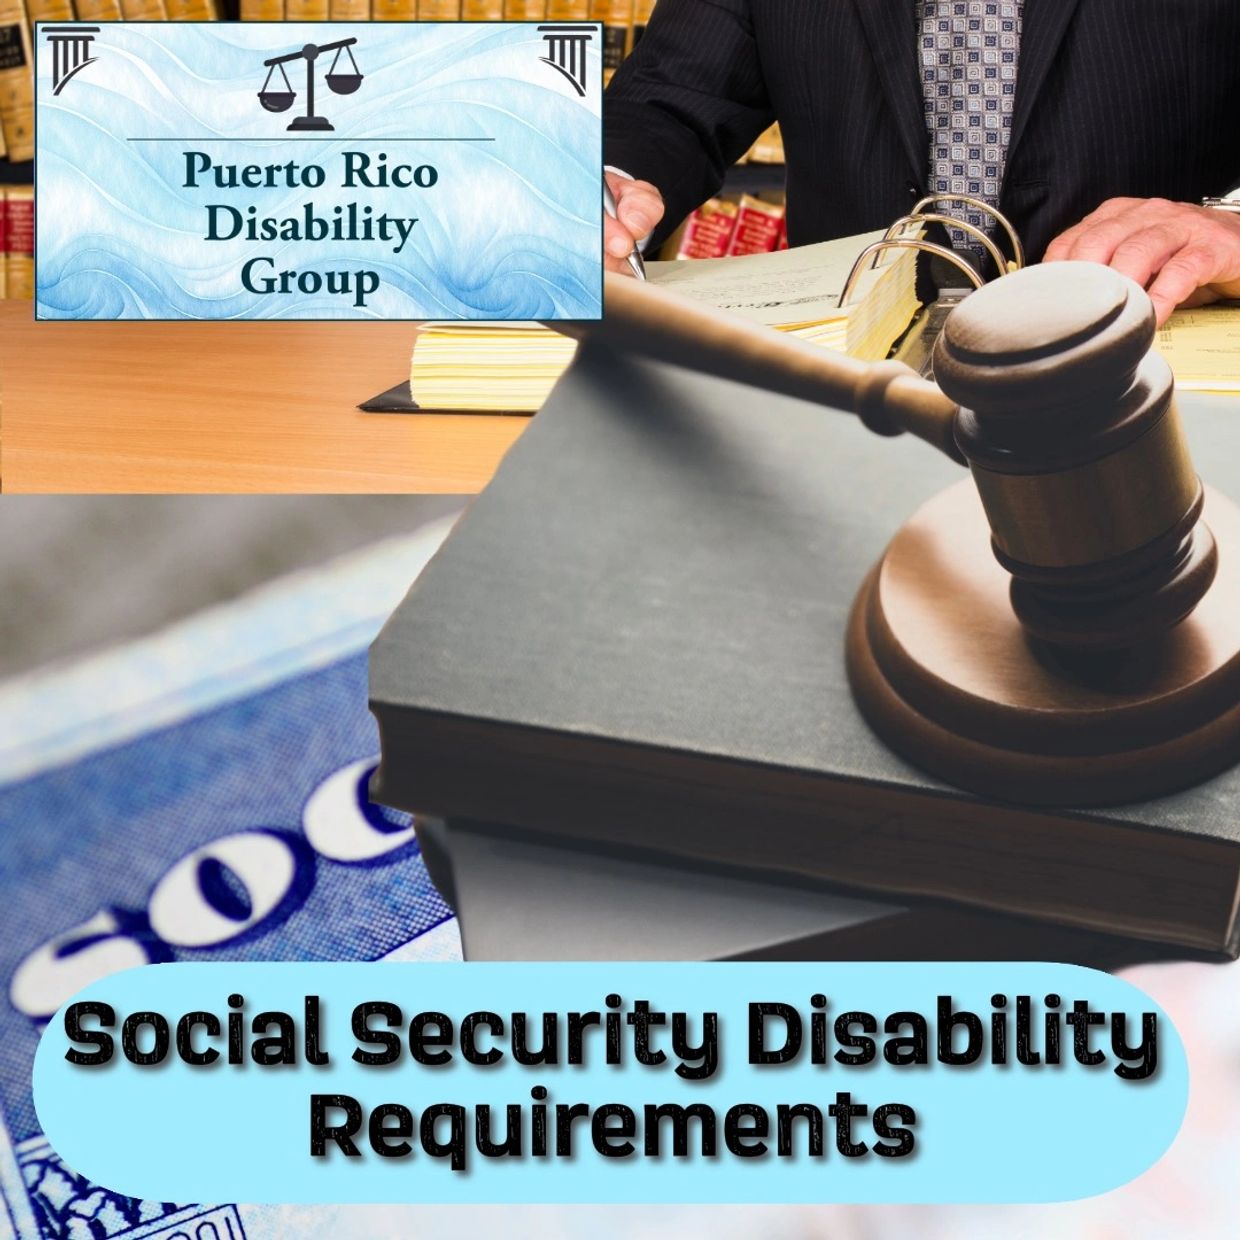 Social Security Disability Requirements